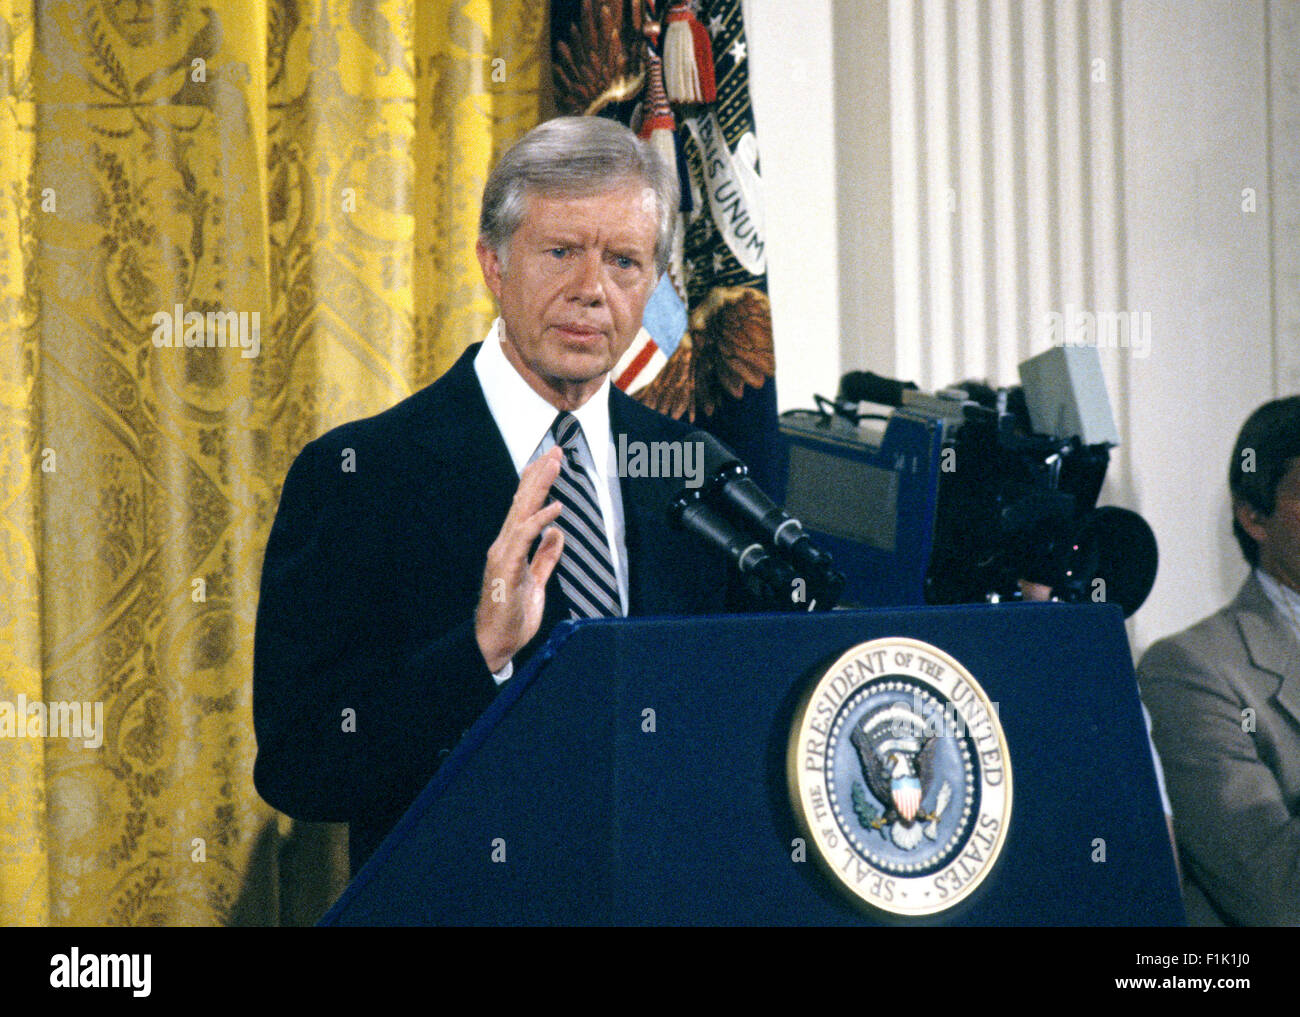 United States President Jimmy Carter holds a press conference in the East Room of the White House in Washington, DC on August 4, 1980. The President discussed the scandal surrounding his brother Billy. Carter said there was no impropriety in his brother's activities and insisted neither he nor any member of his administration broke any laws. The President went on to say his brother tried to free the American hostages being held in Iran through his dealings with the Libyans. Credit: Benjamin E. 'Gene' Forte/CNP - NO WIRE SERVICE - Stock Photo